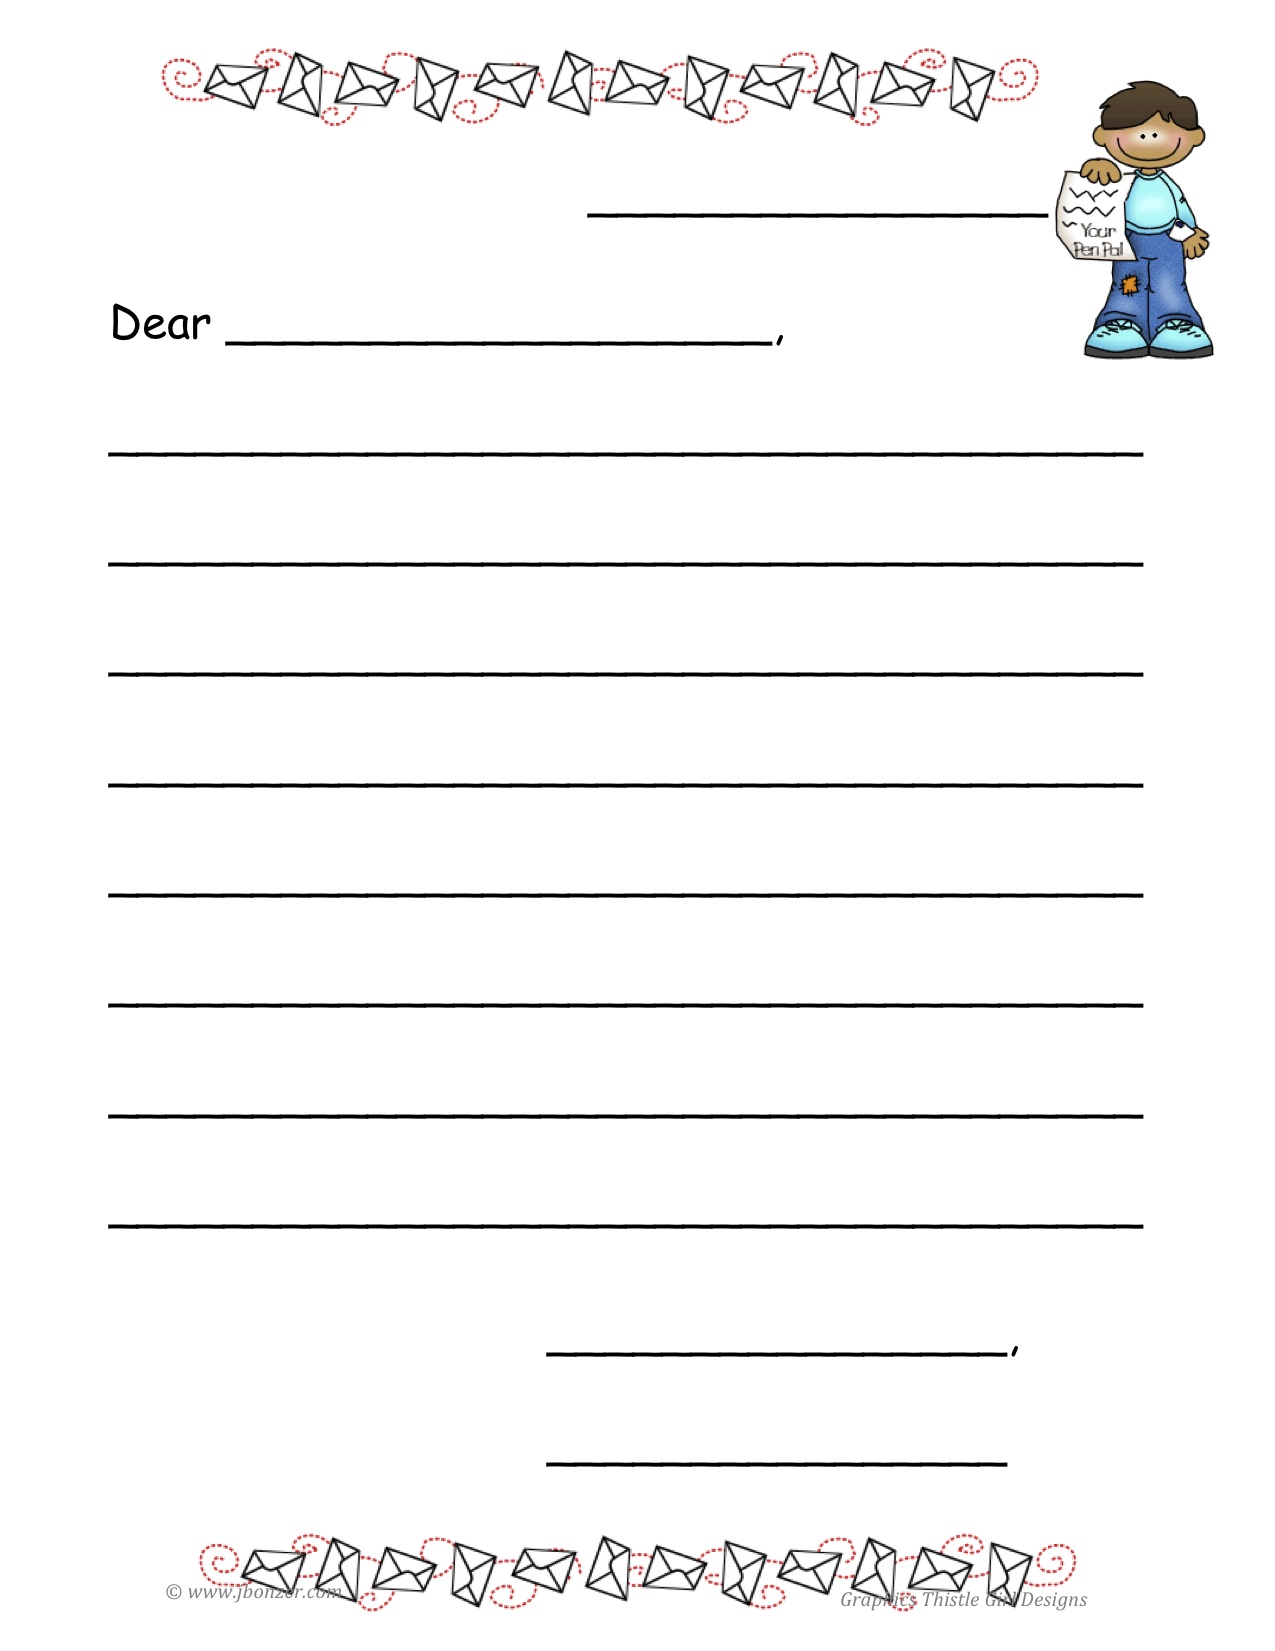 4-best-images-of-printable-friendly-letter-template-elementary-blank